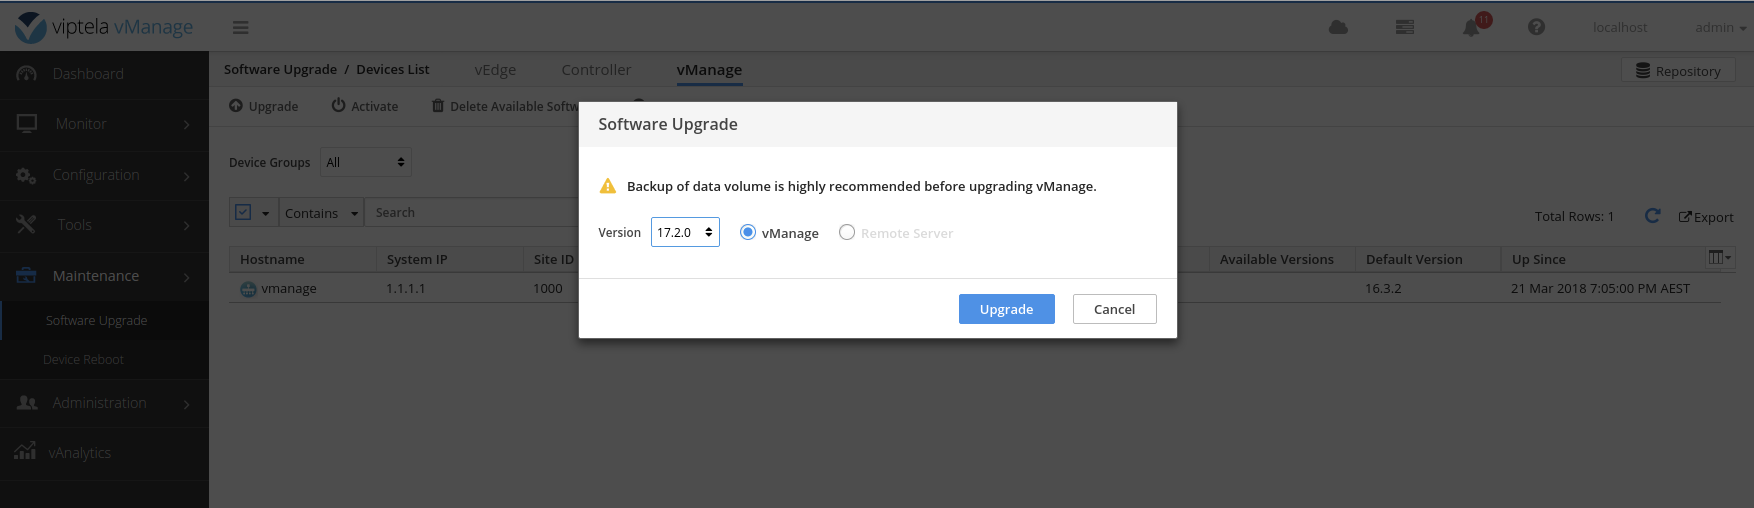 vmanage-software-upgrade-2.png